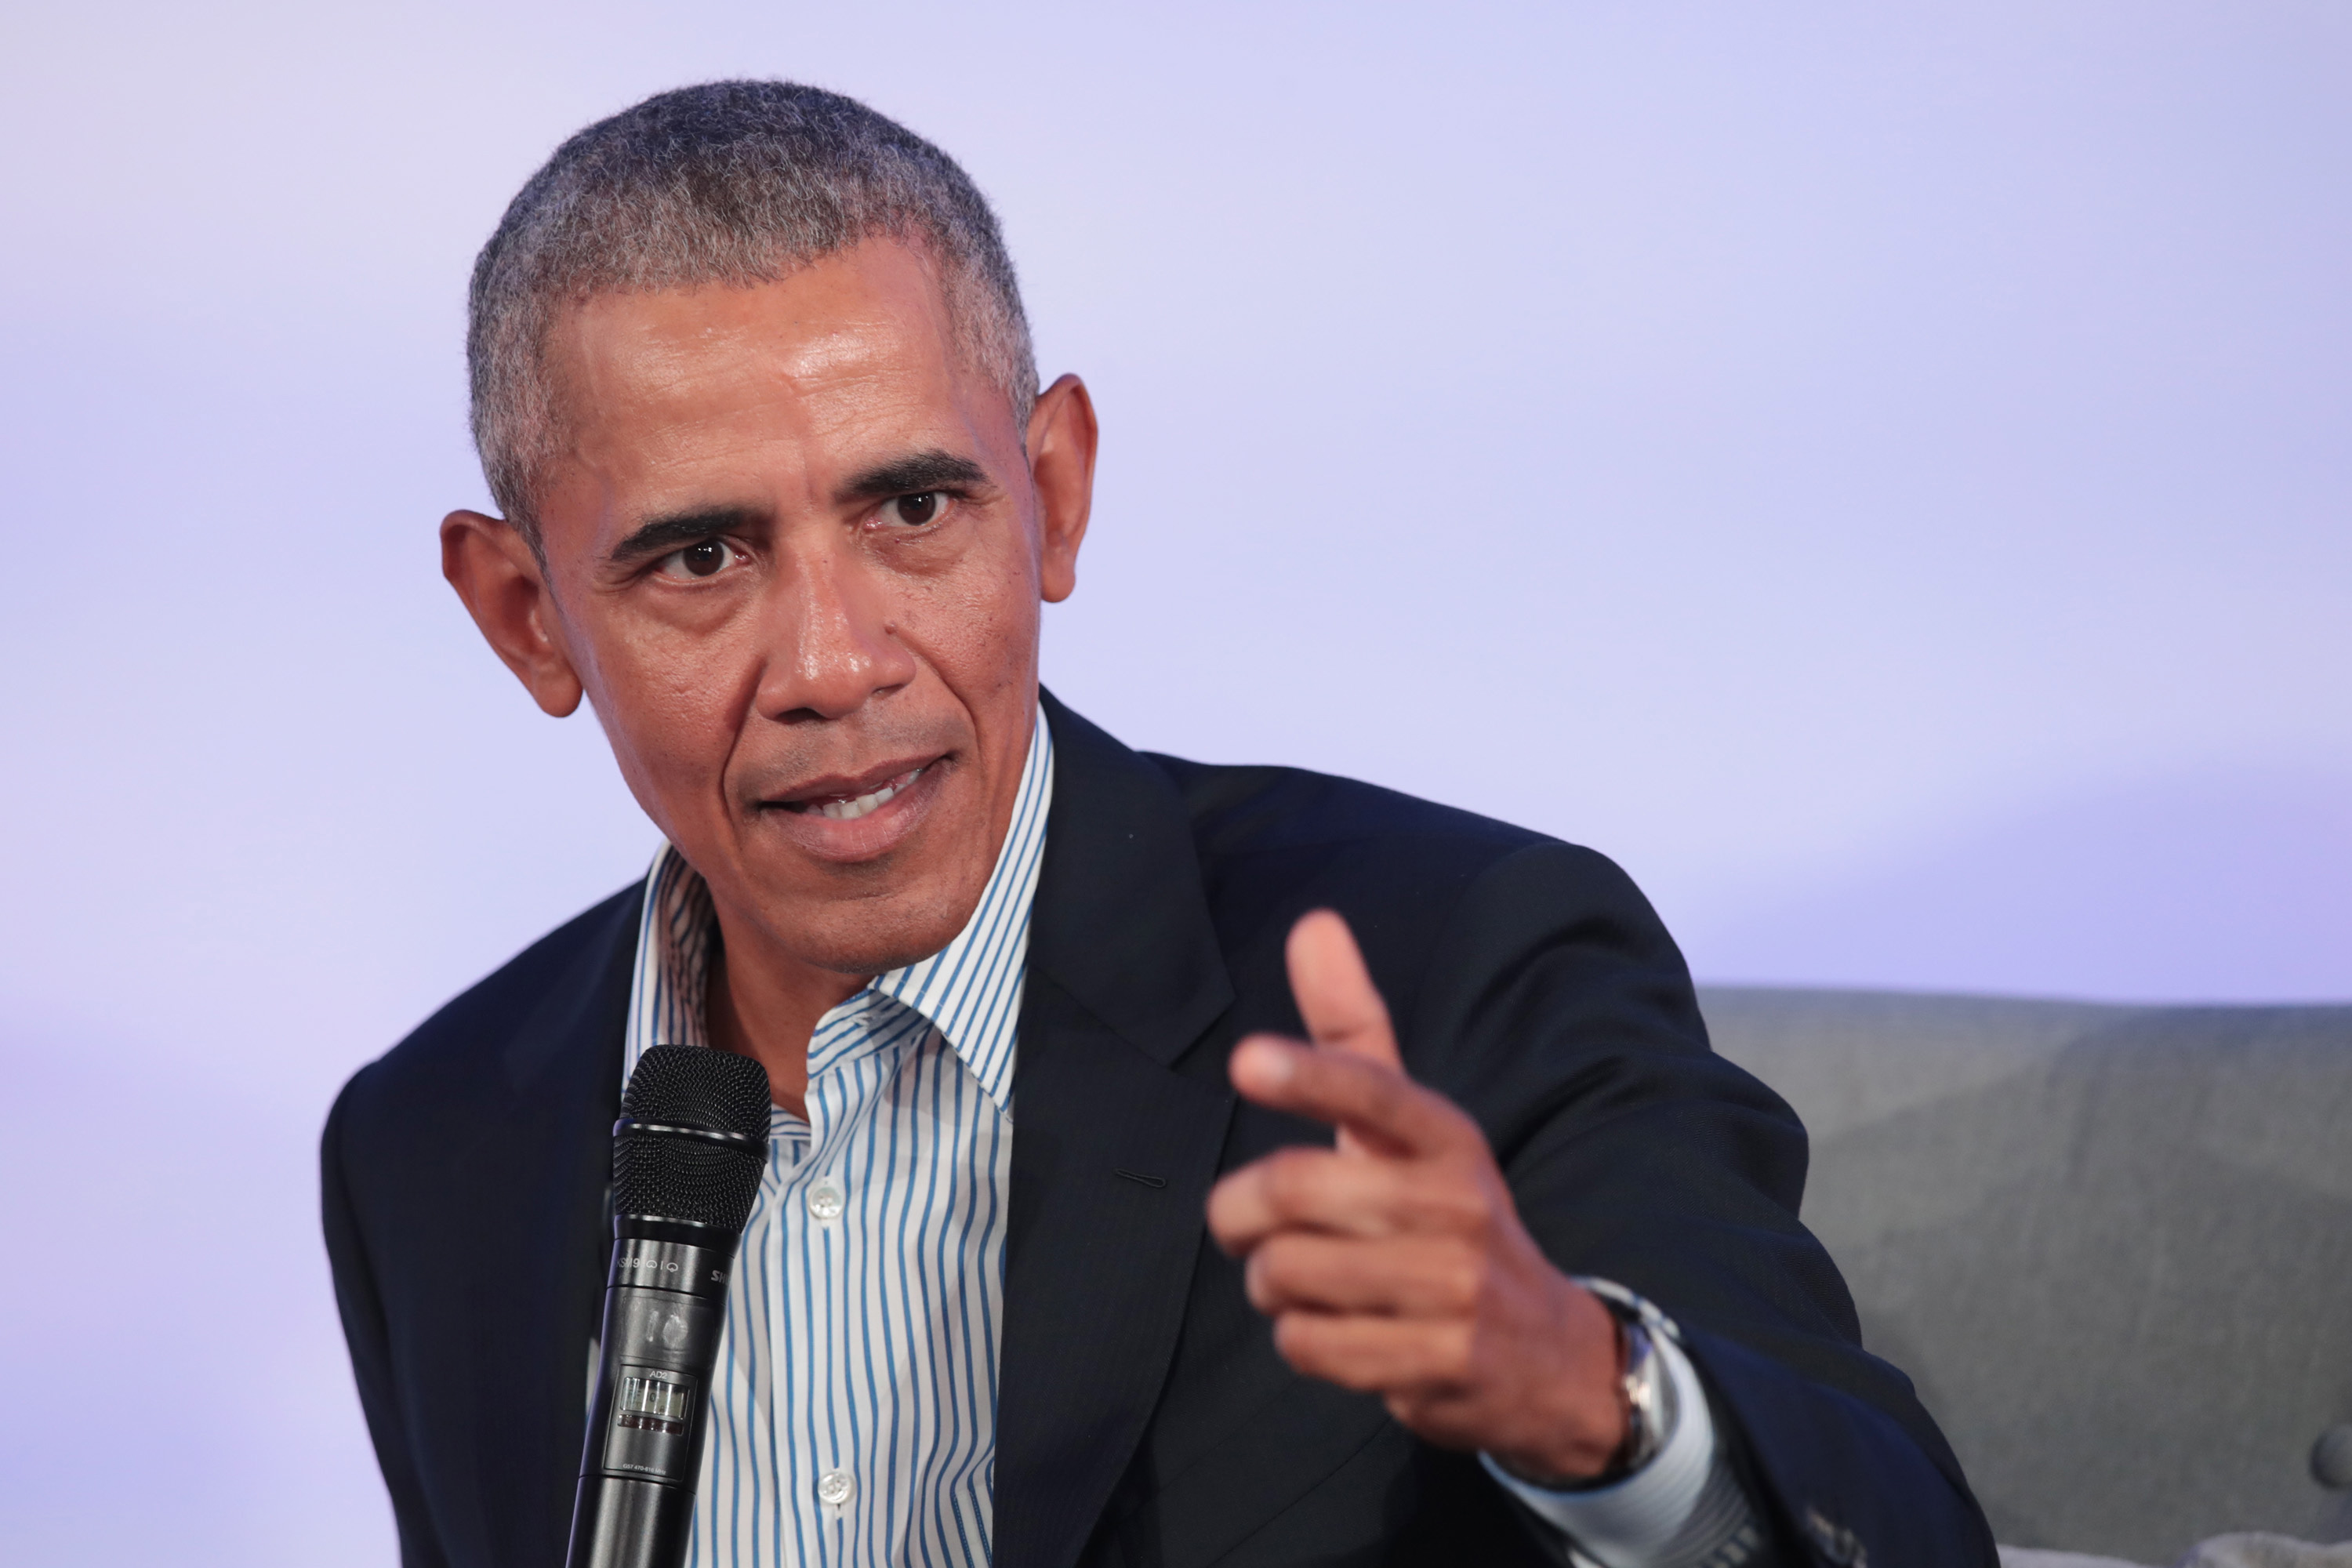 Former President Barack Obama speaks to guests at the Obama Foundation Summit on the campus of the Illinois Institute of Technology on October 29, 2019 in Chicago.